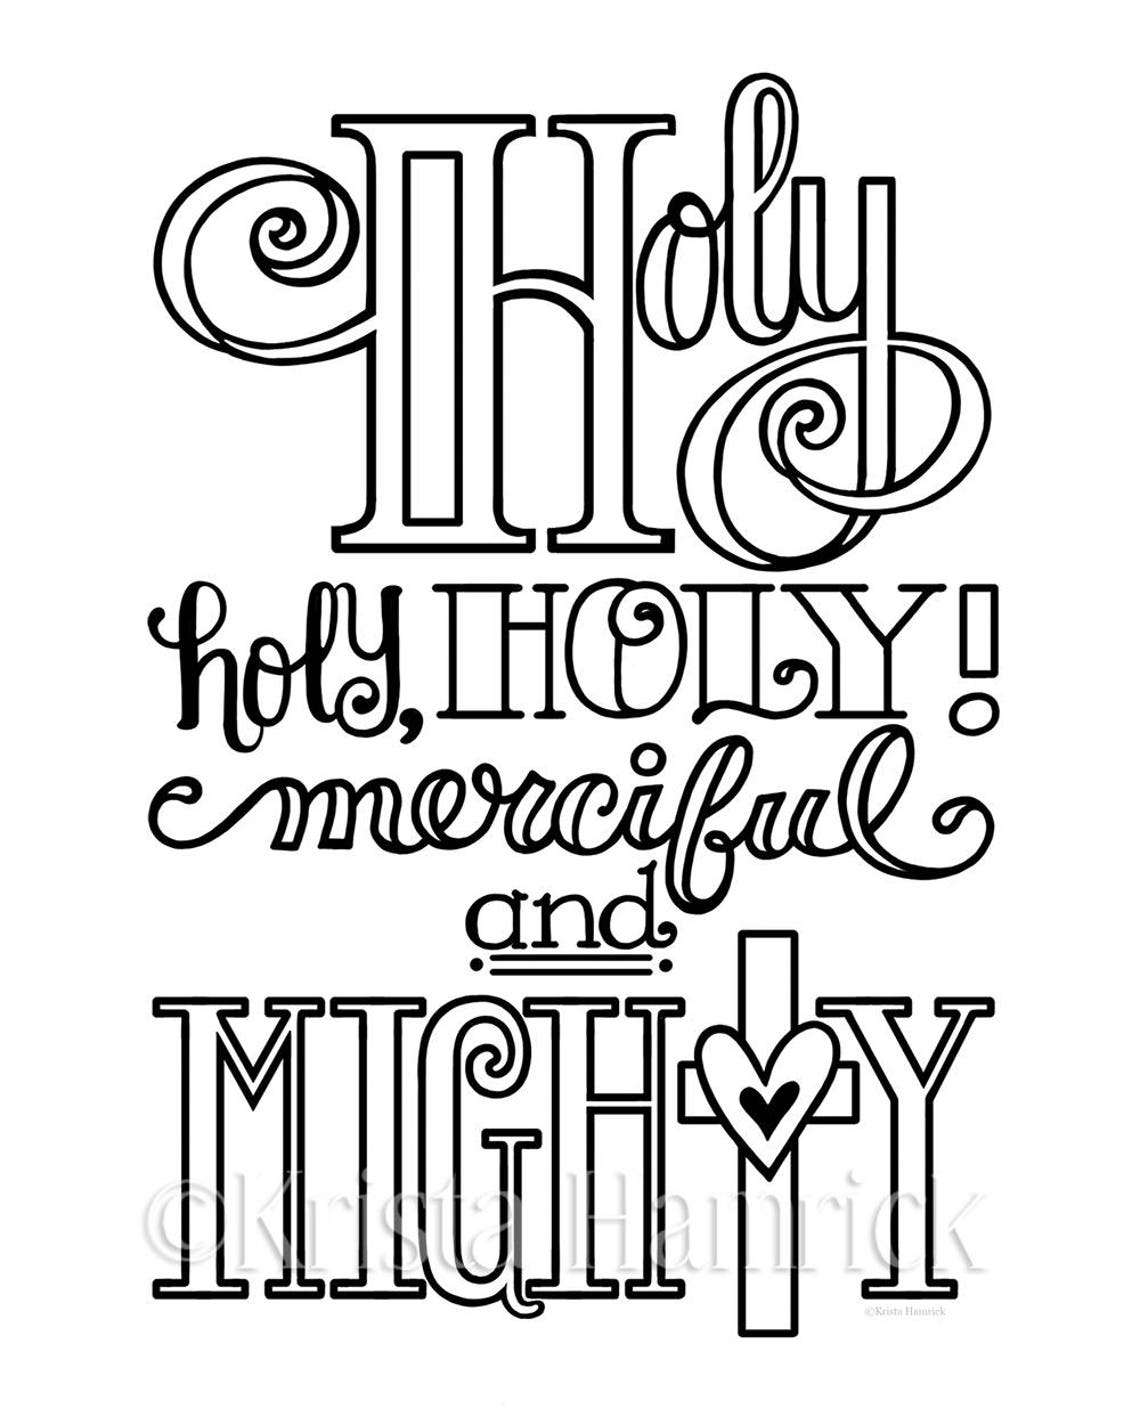 holy-holy-holy-coloring-page-in-two-sizes-8-5x11-bible-etsy